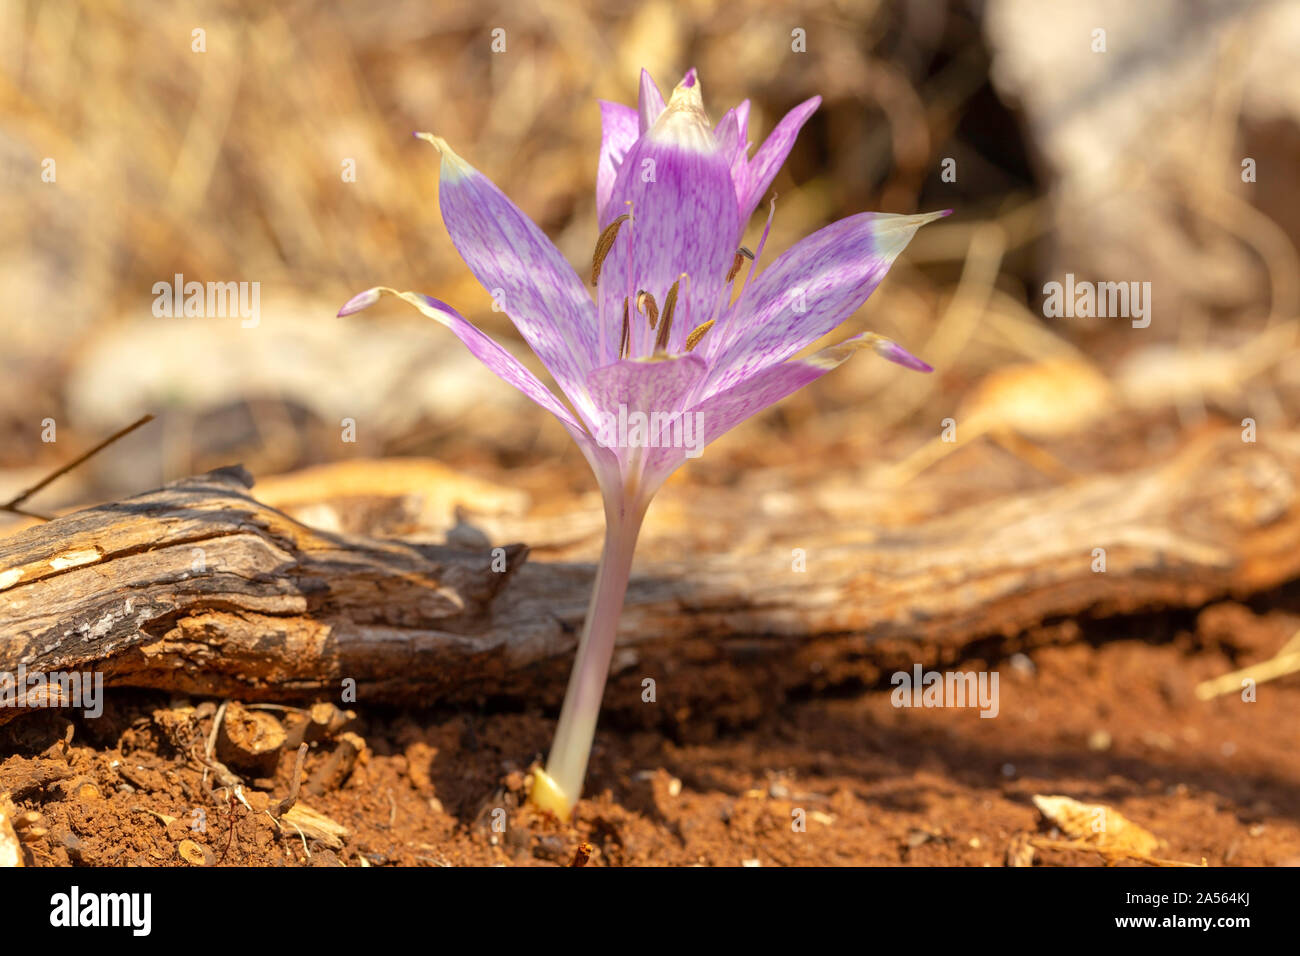 Colchicum autumnale, the autumn crocus (though not a genuine crocus) also known as naked ladies, flowering in October on Crete, Greece Stock Photo